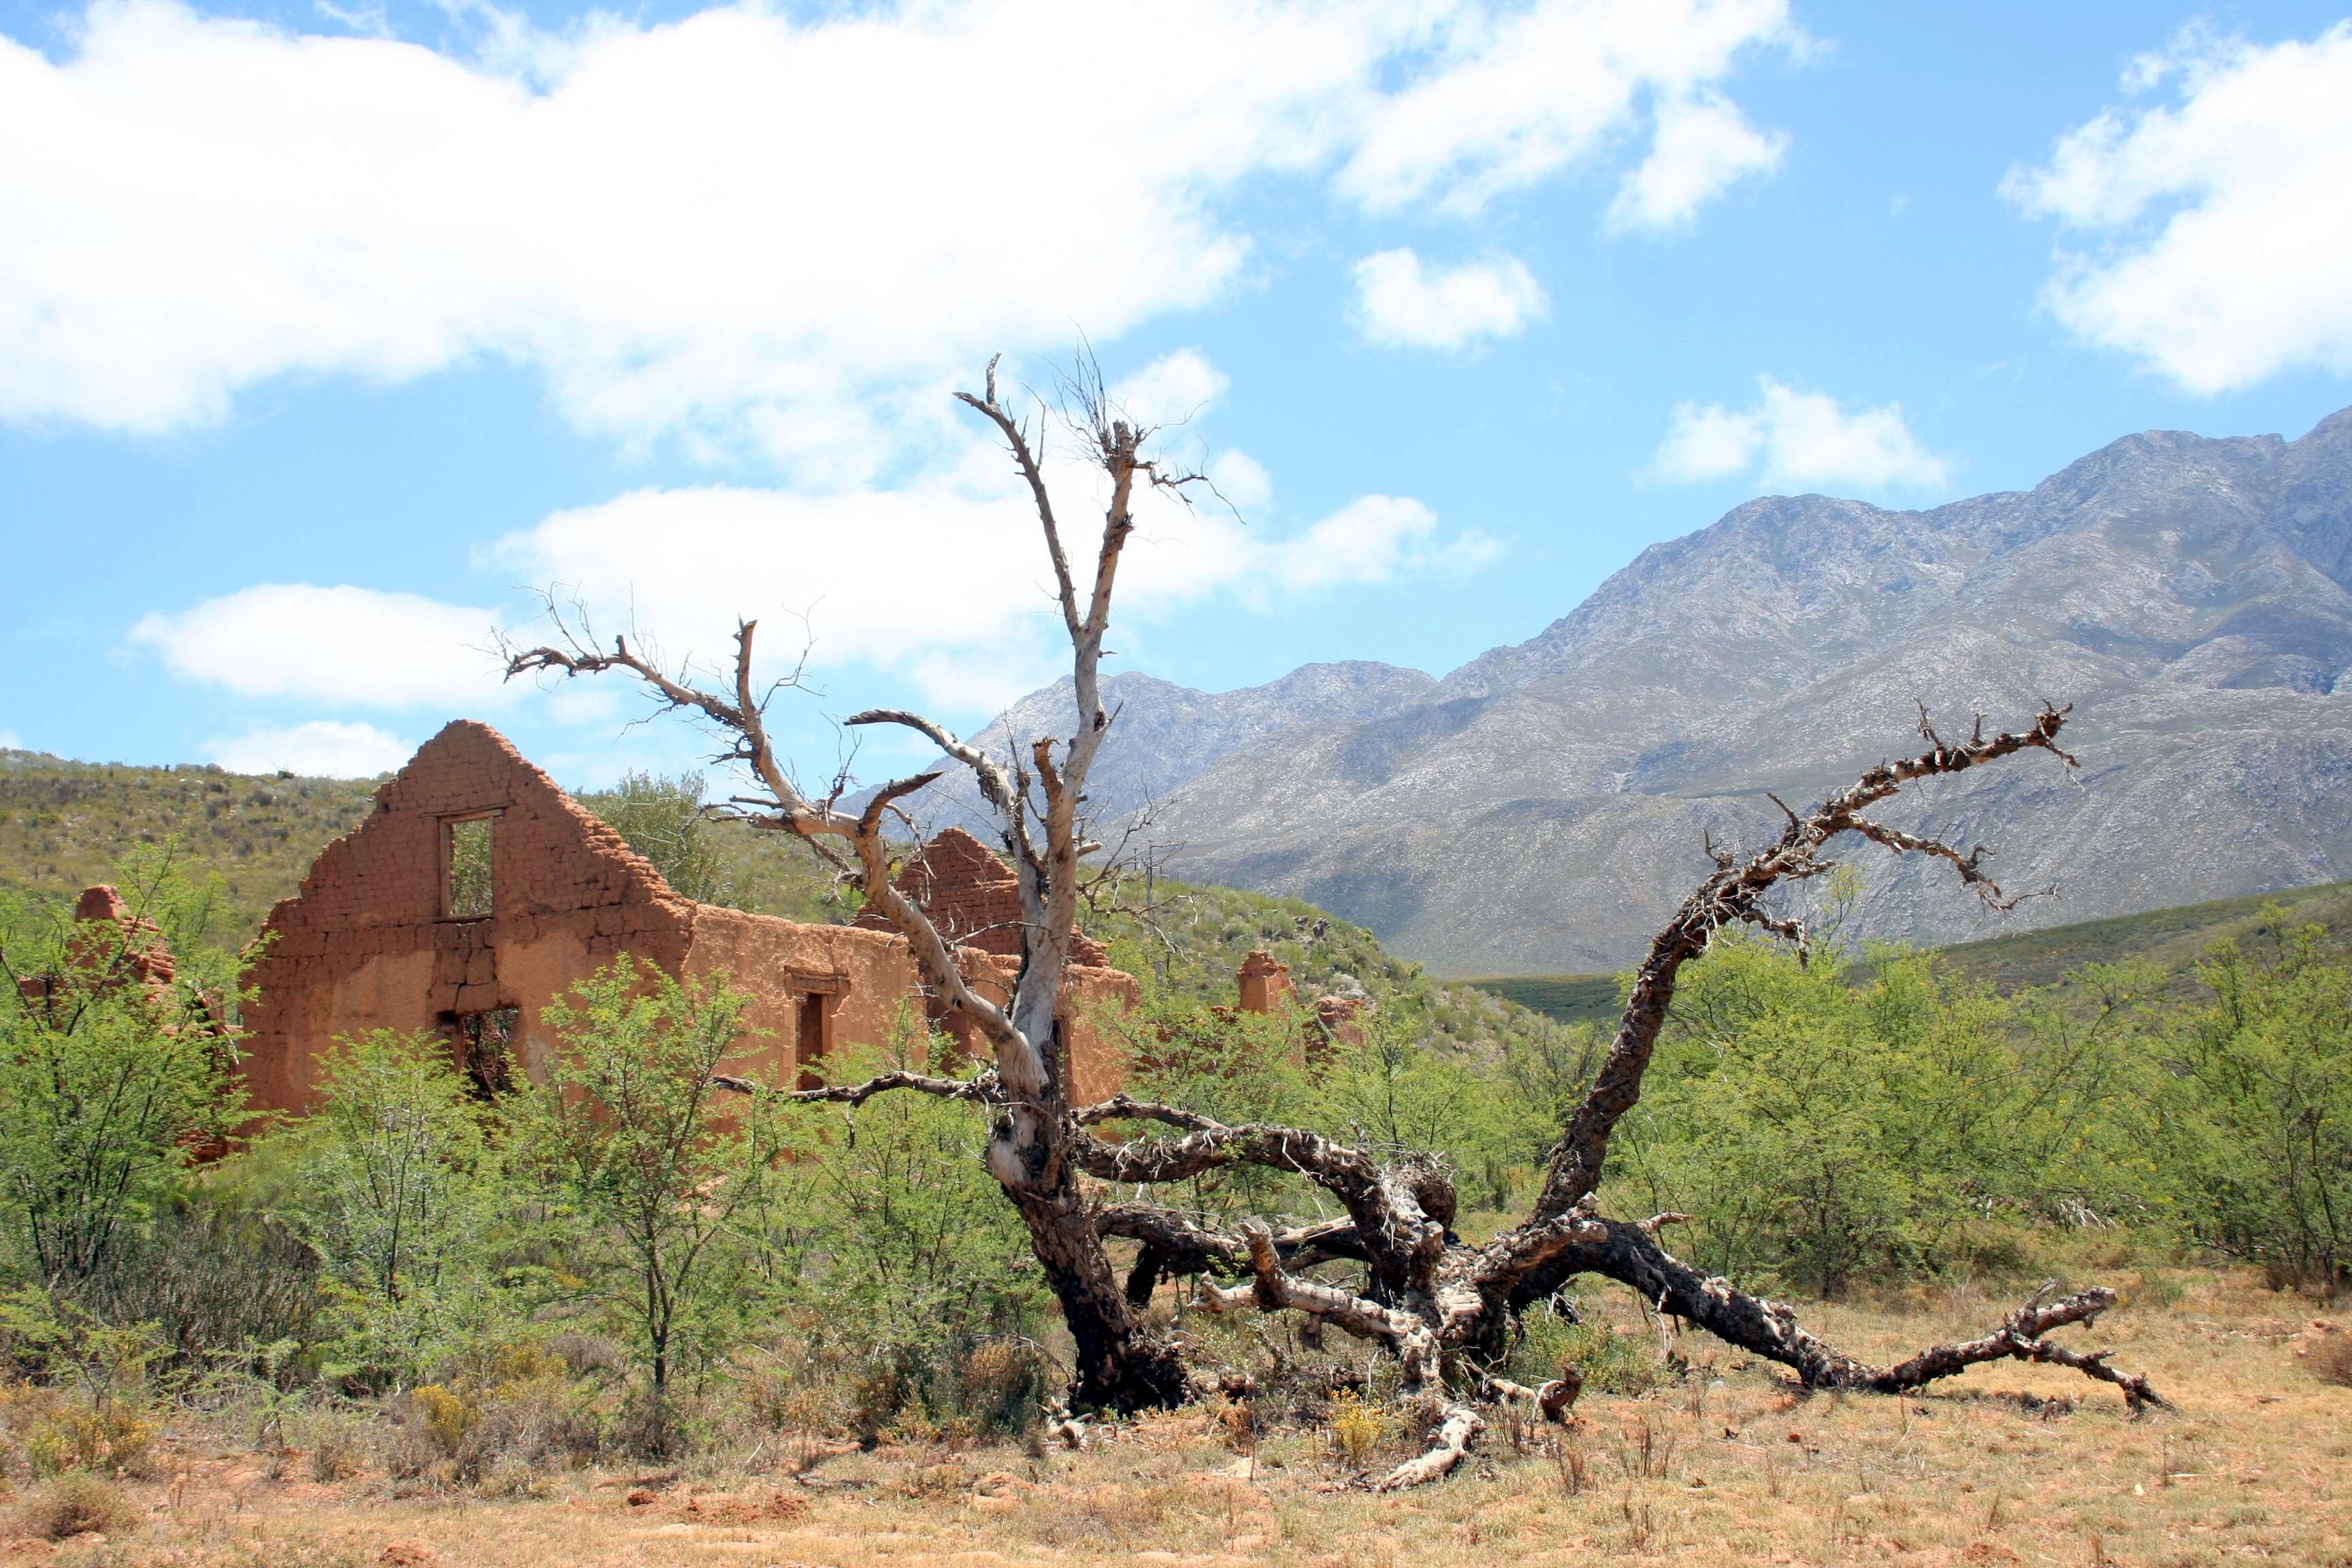 broken, deserted, karoo, ruin, scorched, south africa, tree, western cape wallpaper